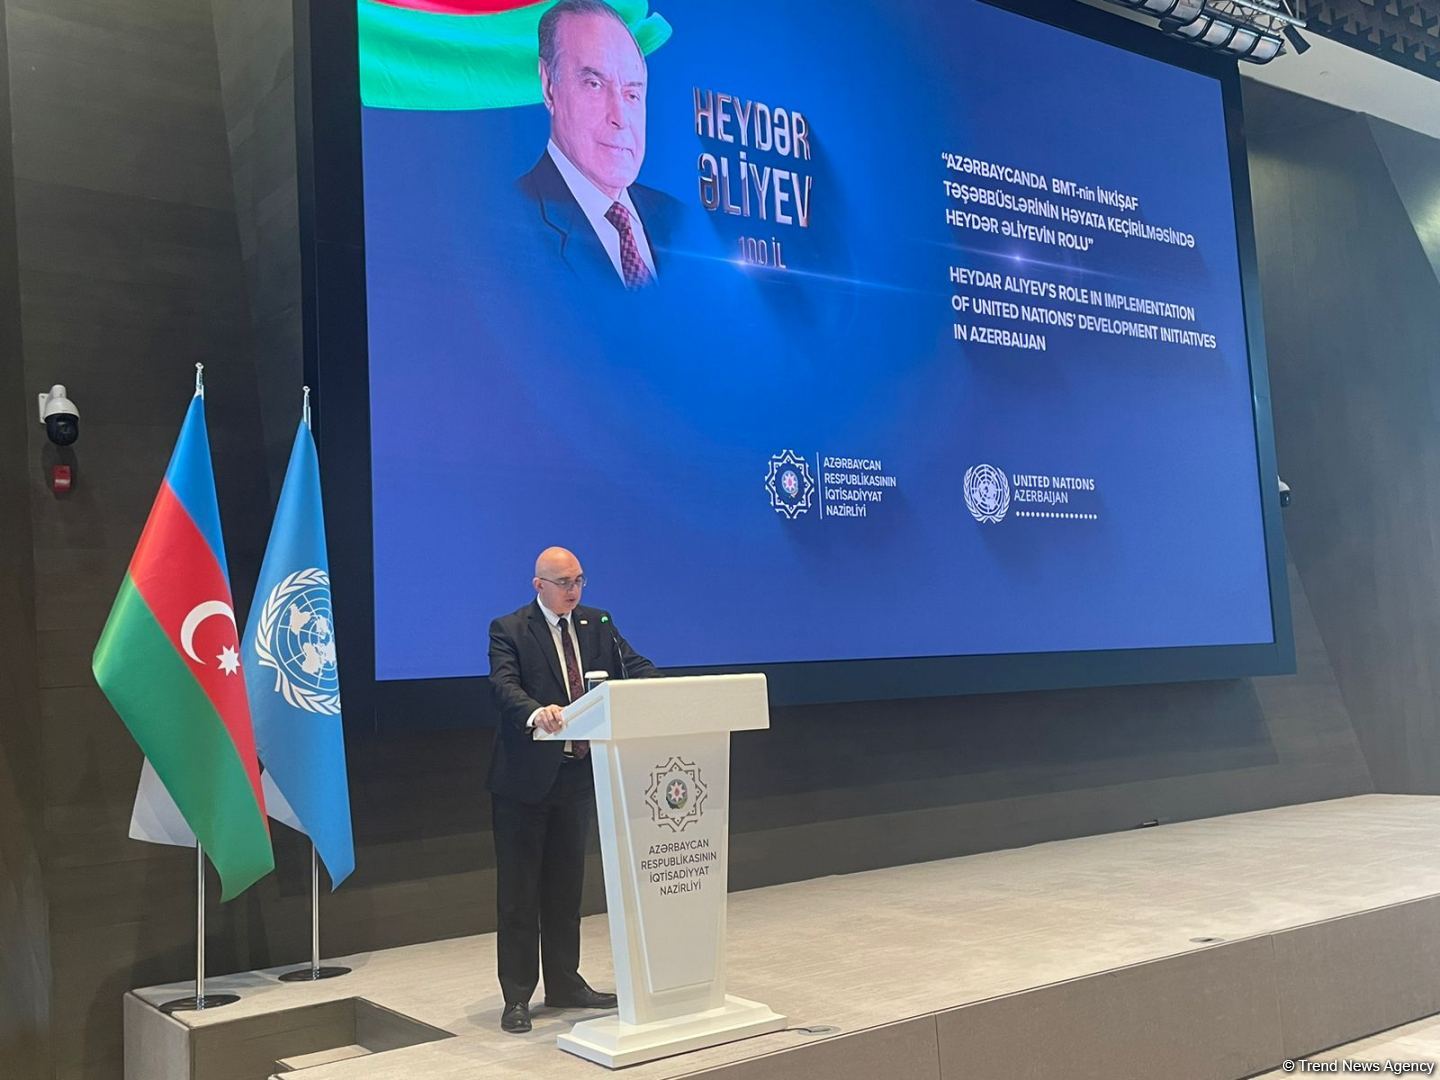 Great leader Heydar Aliyev made invaluable contribution to dev't of Azerbaijan's relations with UN - official